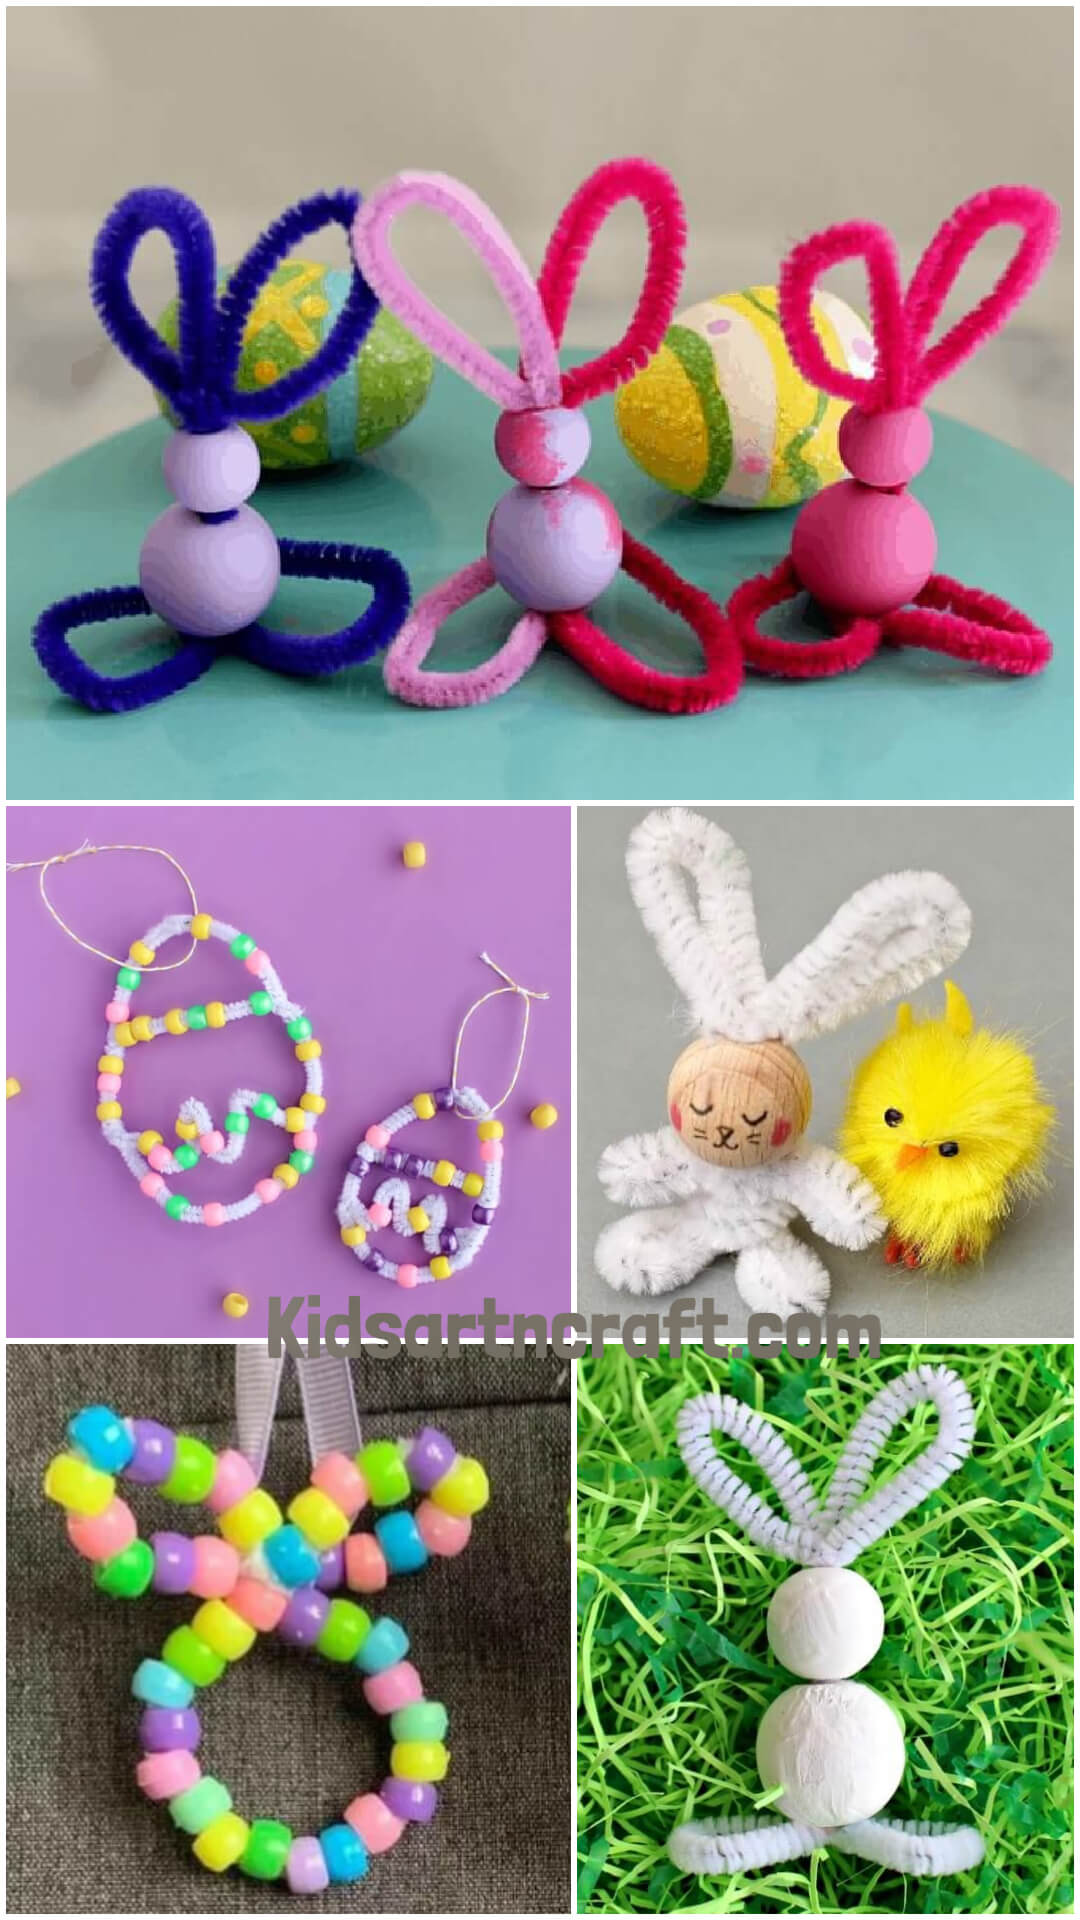 Awesome Pipe Cleaner Easter Beads Crafts Idea To Make Easter Beads Crafts Using Pipe Cleaner